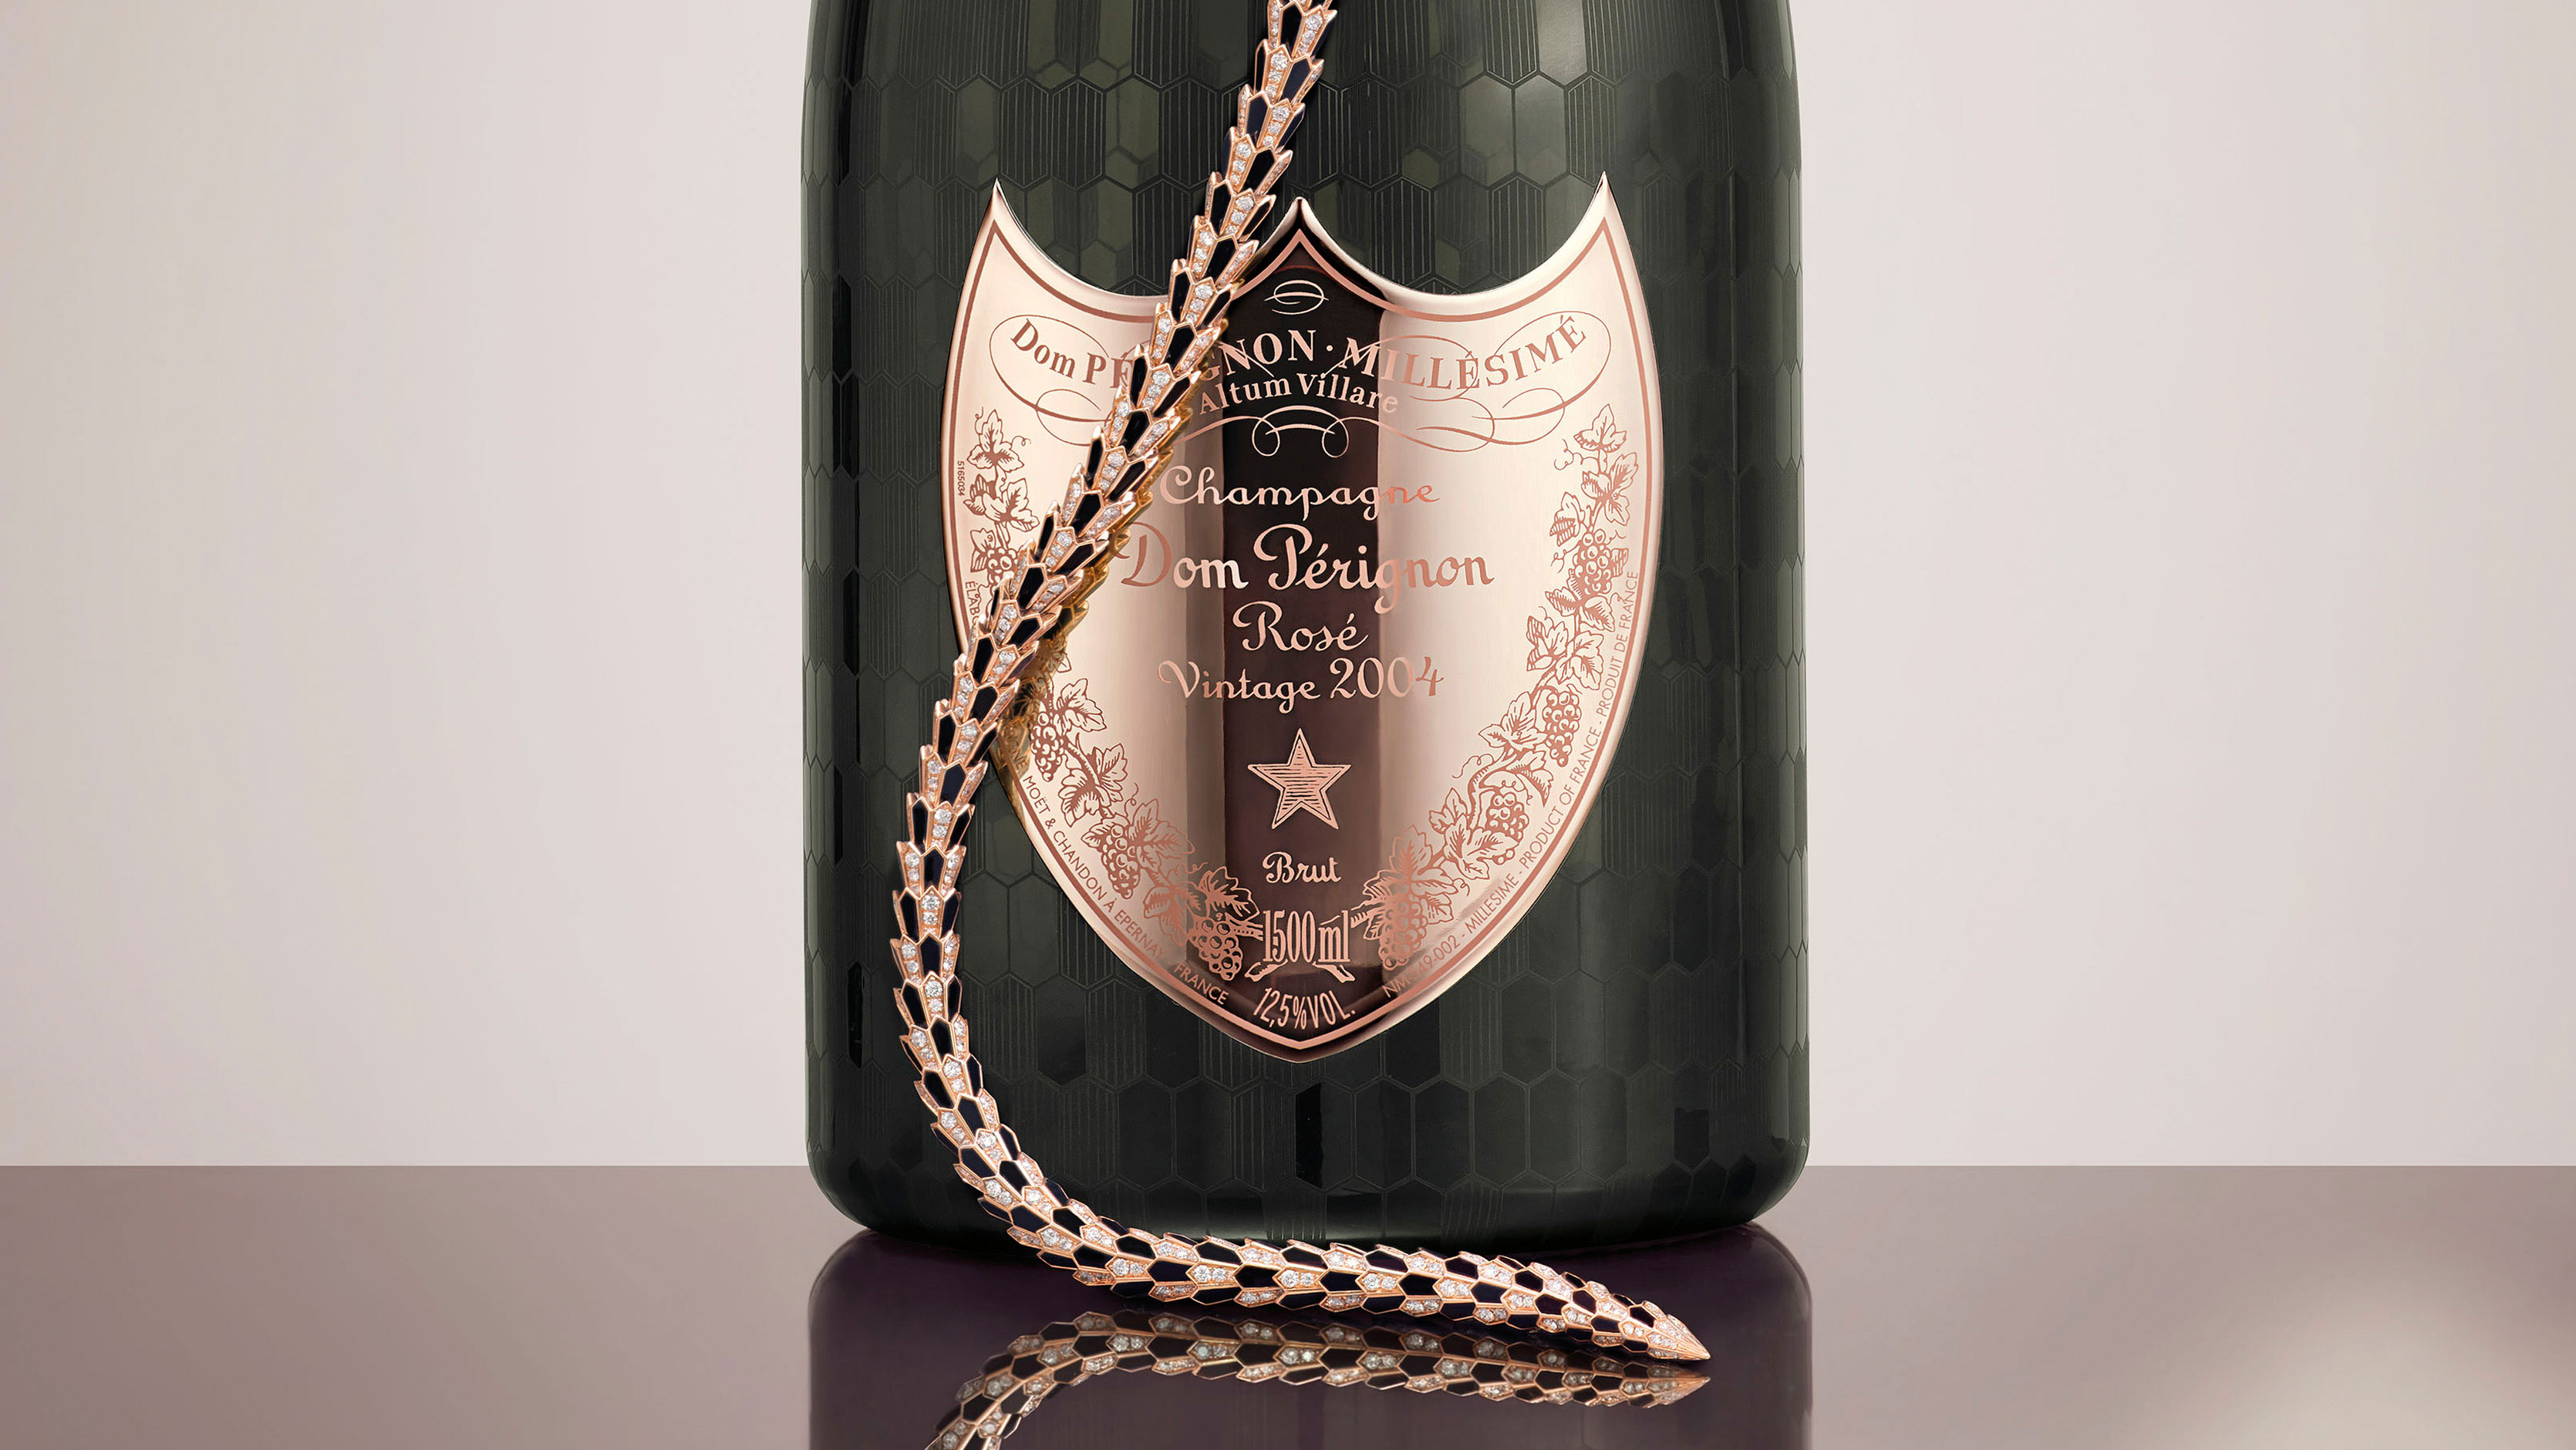 Bvlgari and Dom Pérignon Limited-Edition Champagne | Departures